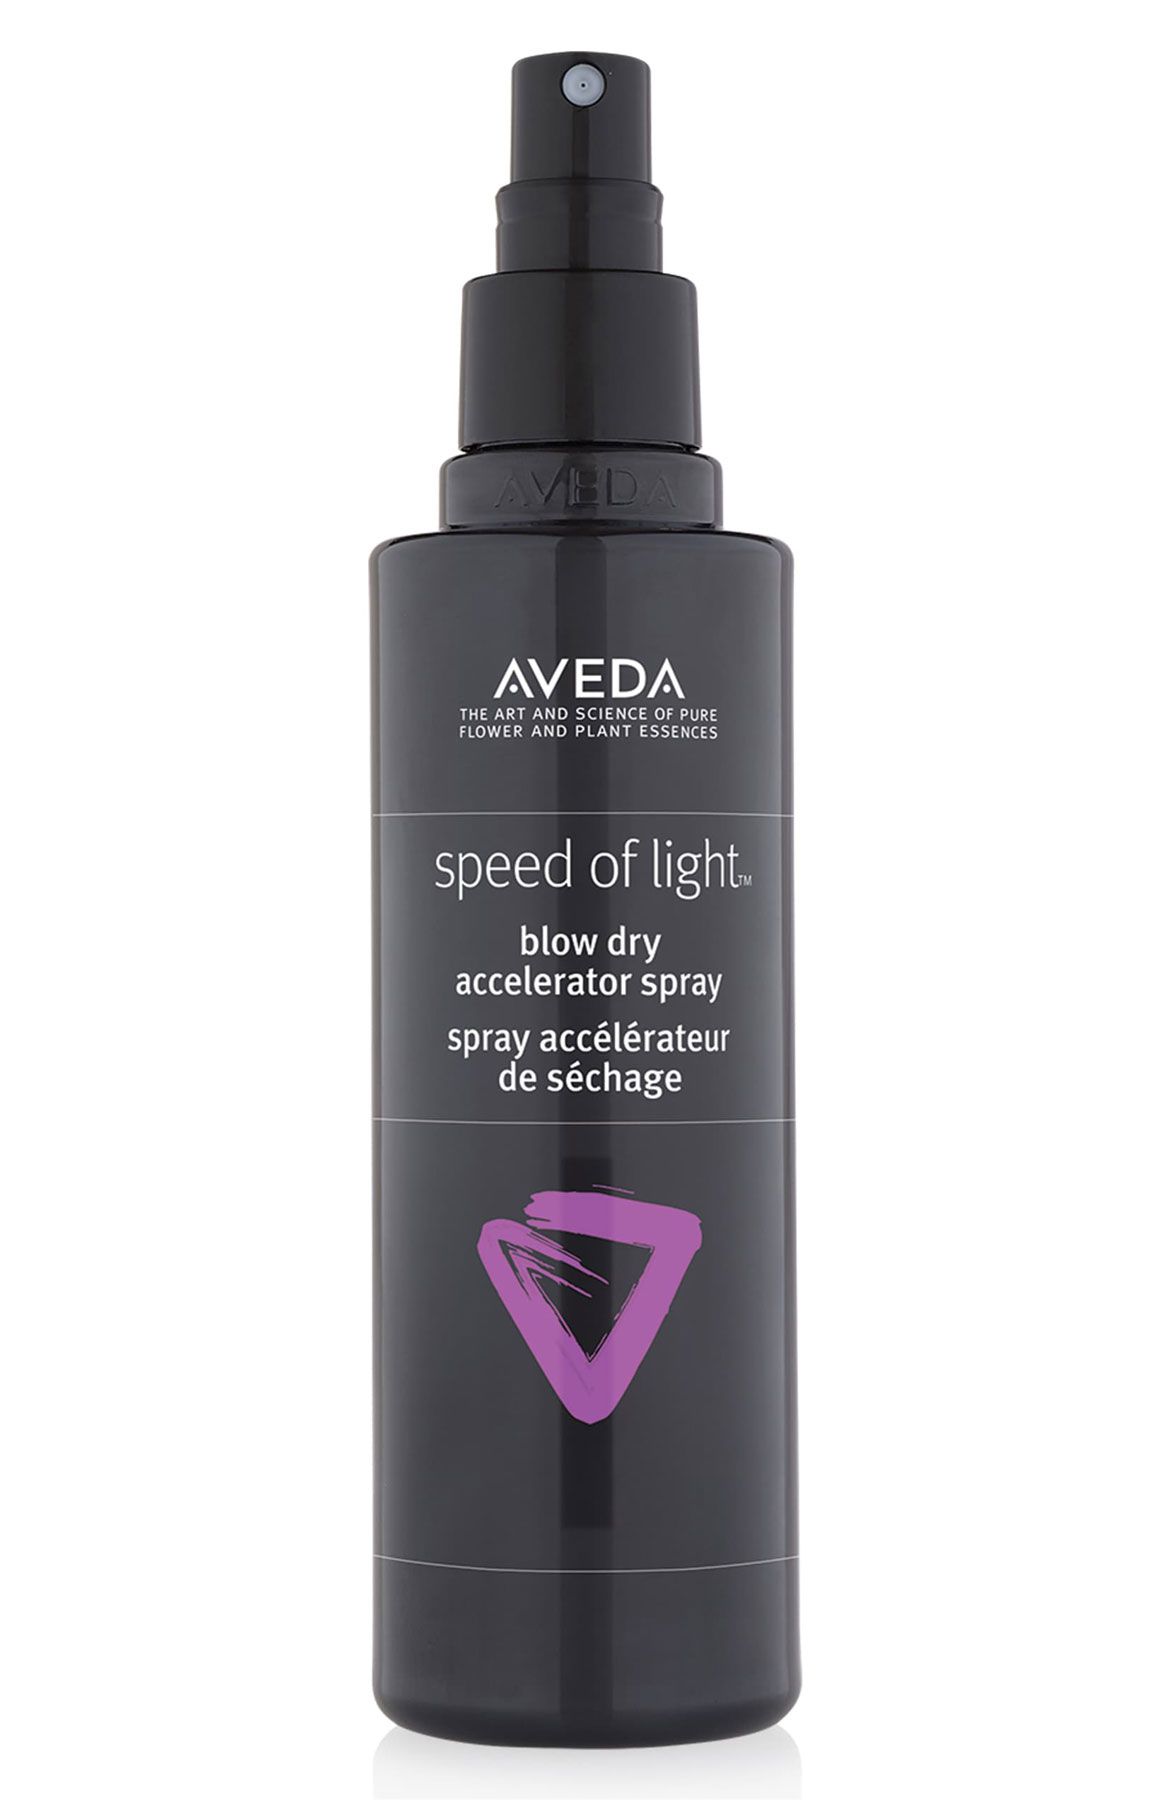 Cleverest Items 2020 - Aveda Speed ​​of Light Blow Dry Accelerator Spray